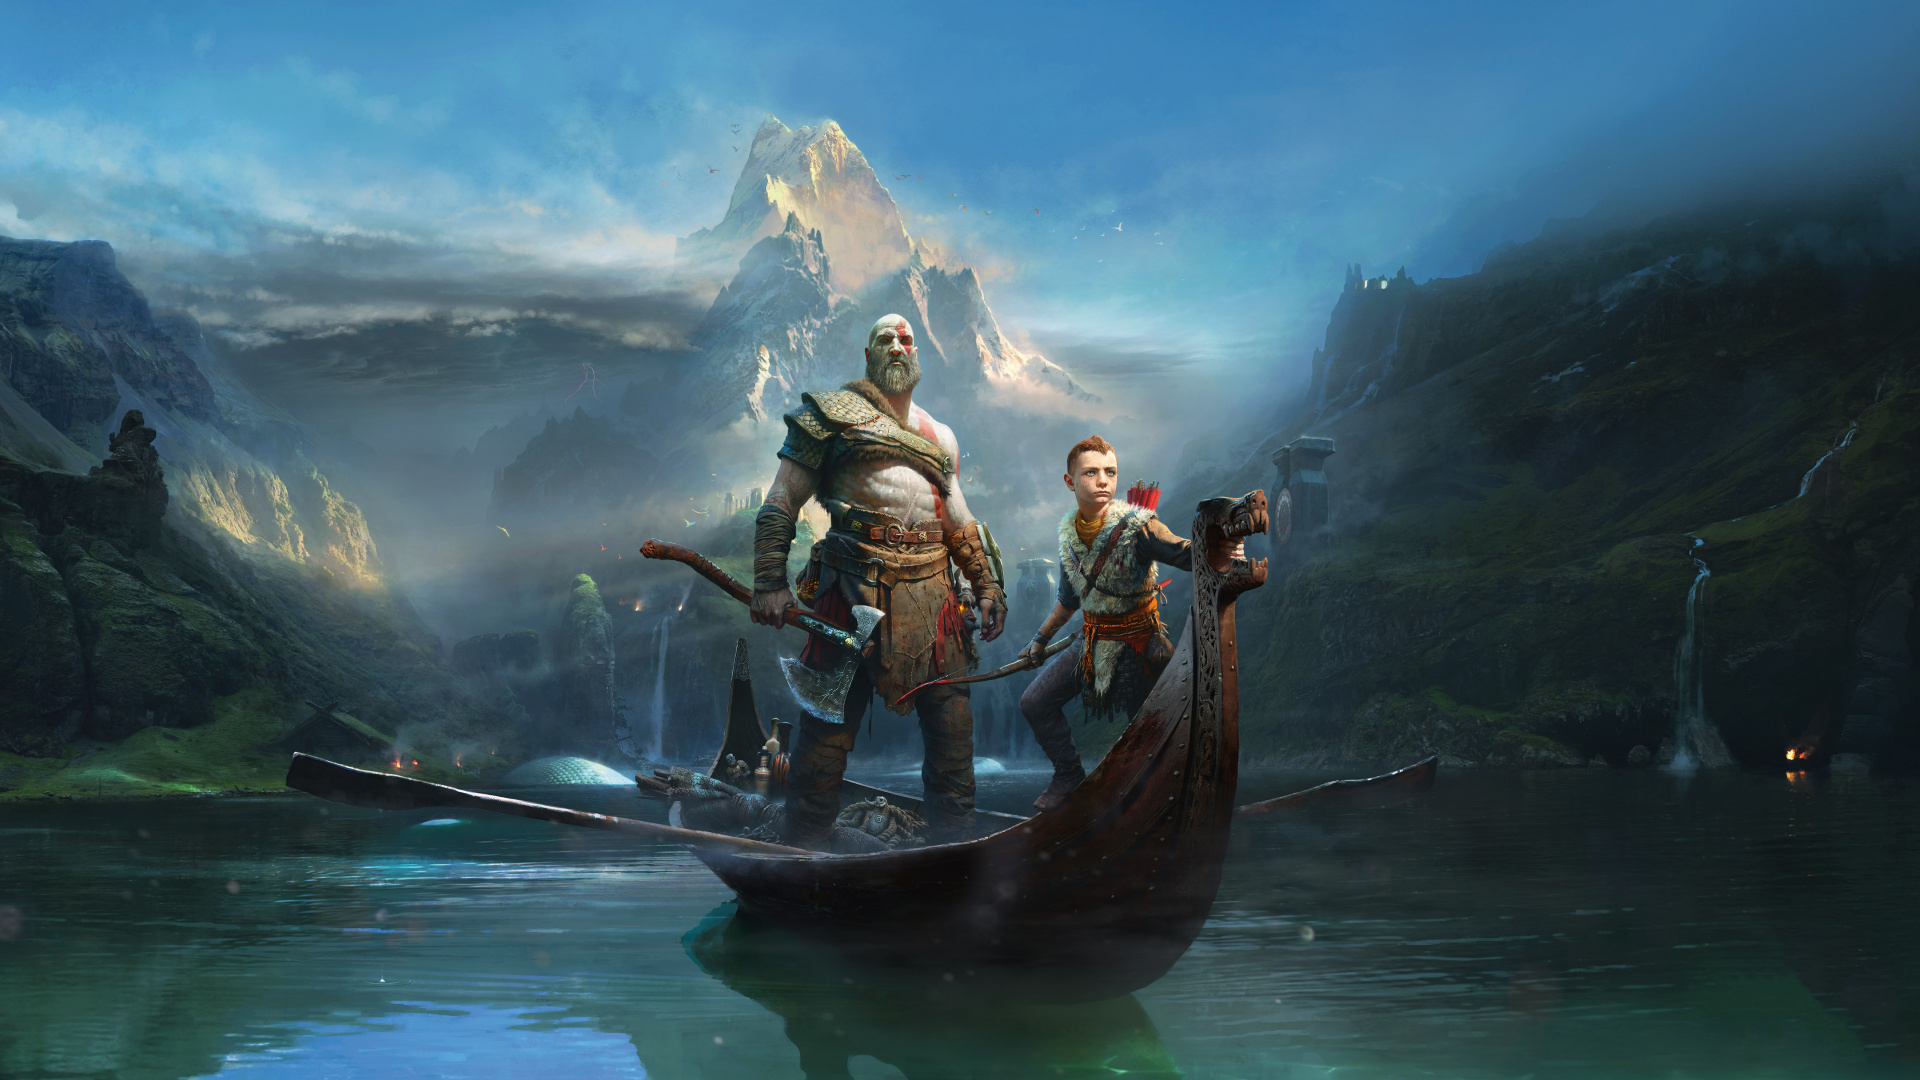 God of War, Kratos, Playstation 4, Adventure Game, pc Game. Wallpaper in 1920x1080 Resolution